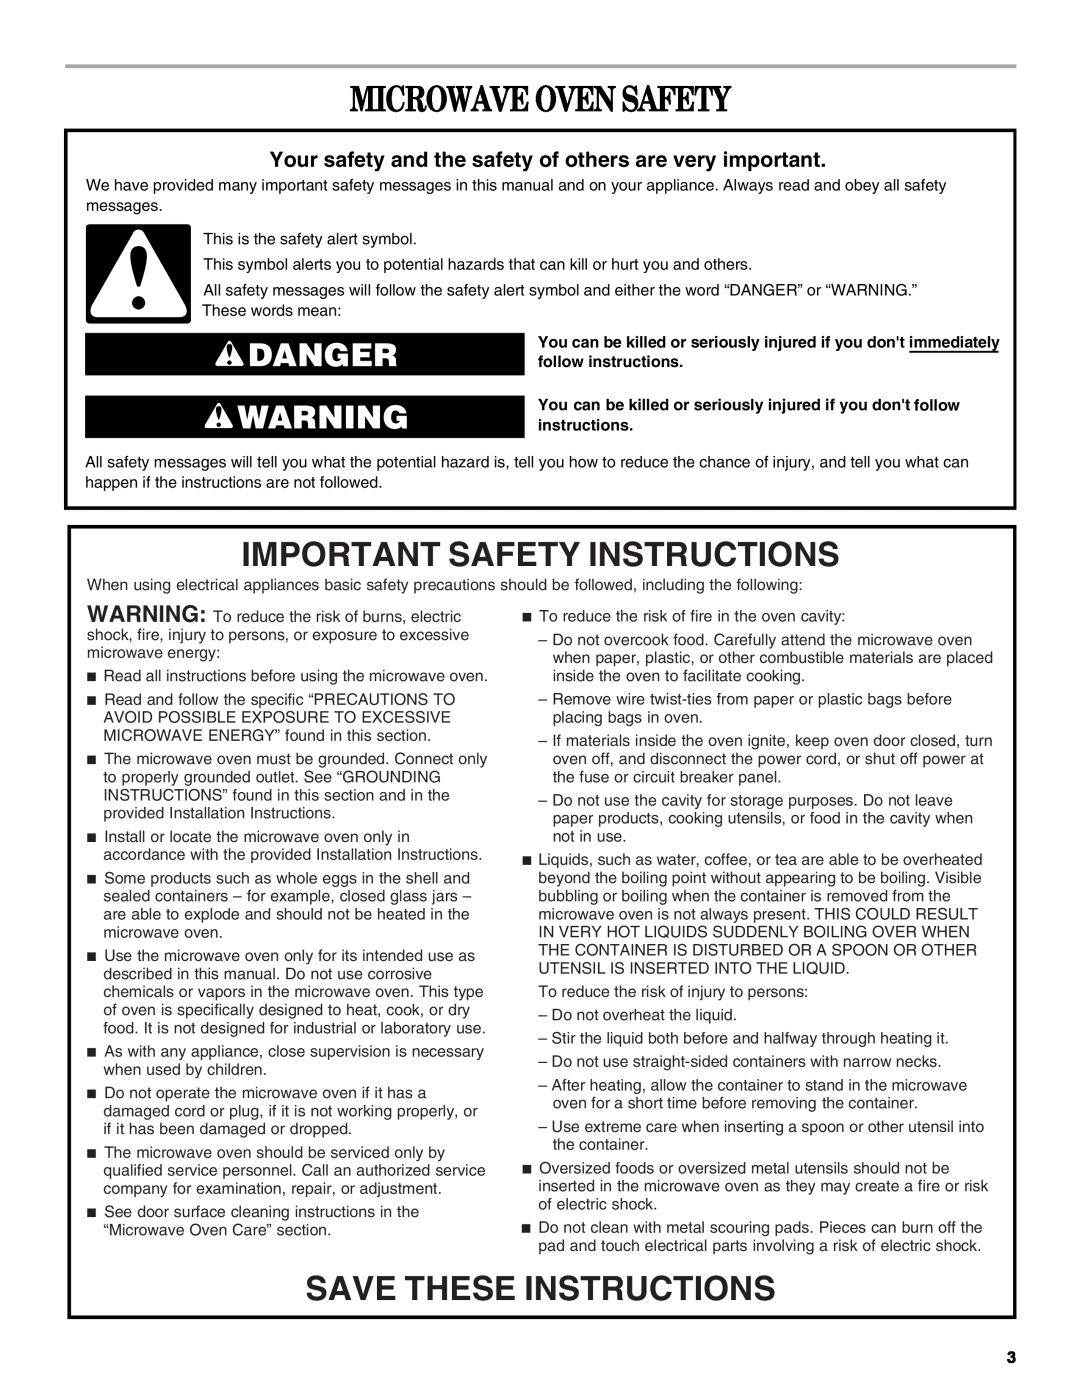 Whirlpool MT4155 manual Microwave Oven Safety, Important Safety Instructions, Save These Instructions, Danger 